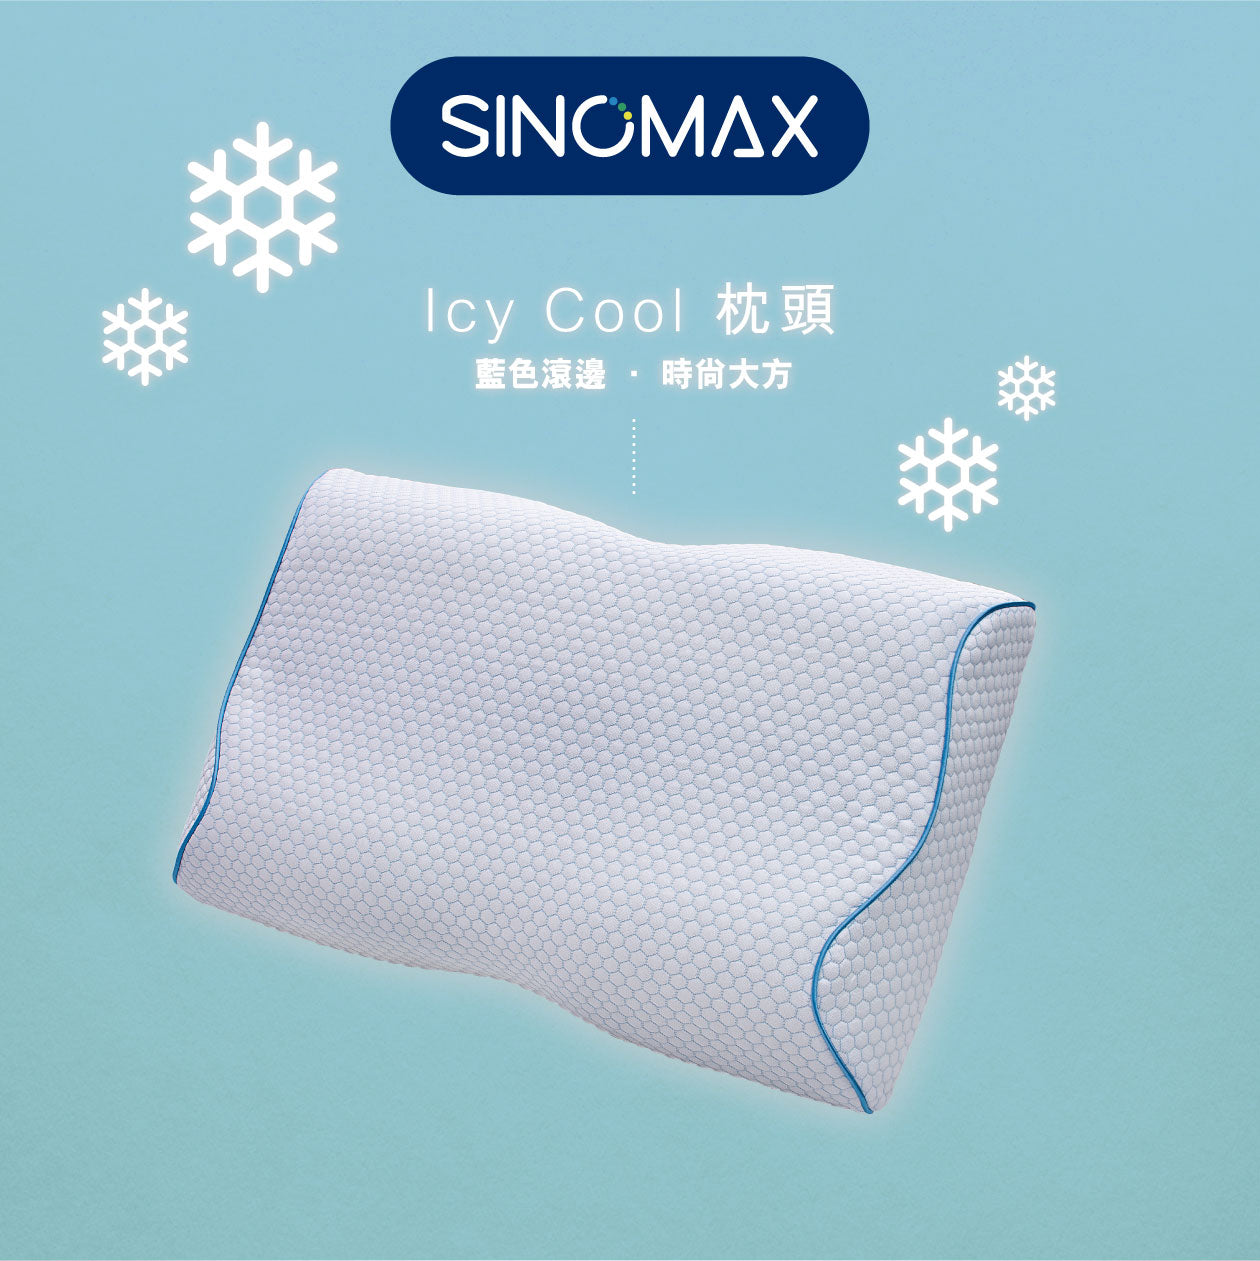 Icy Cool Pillows